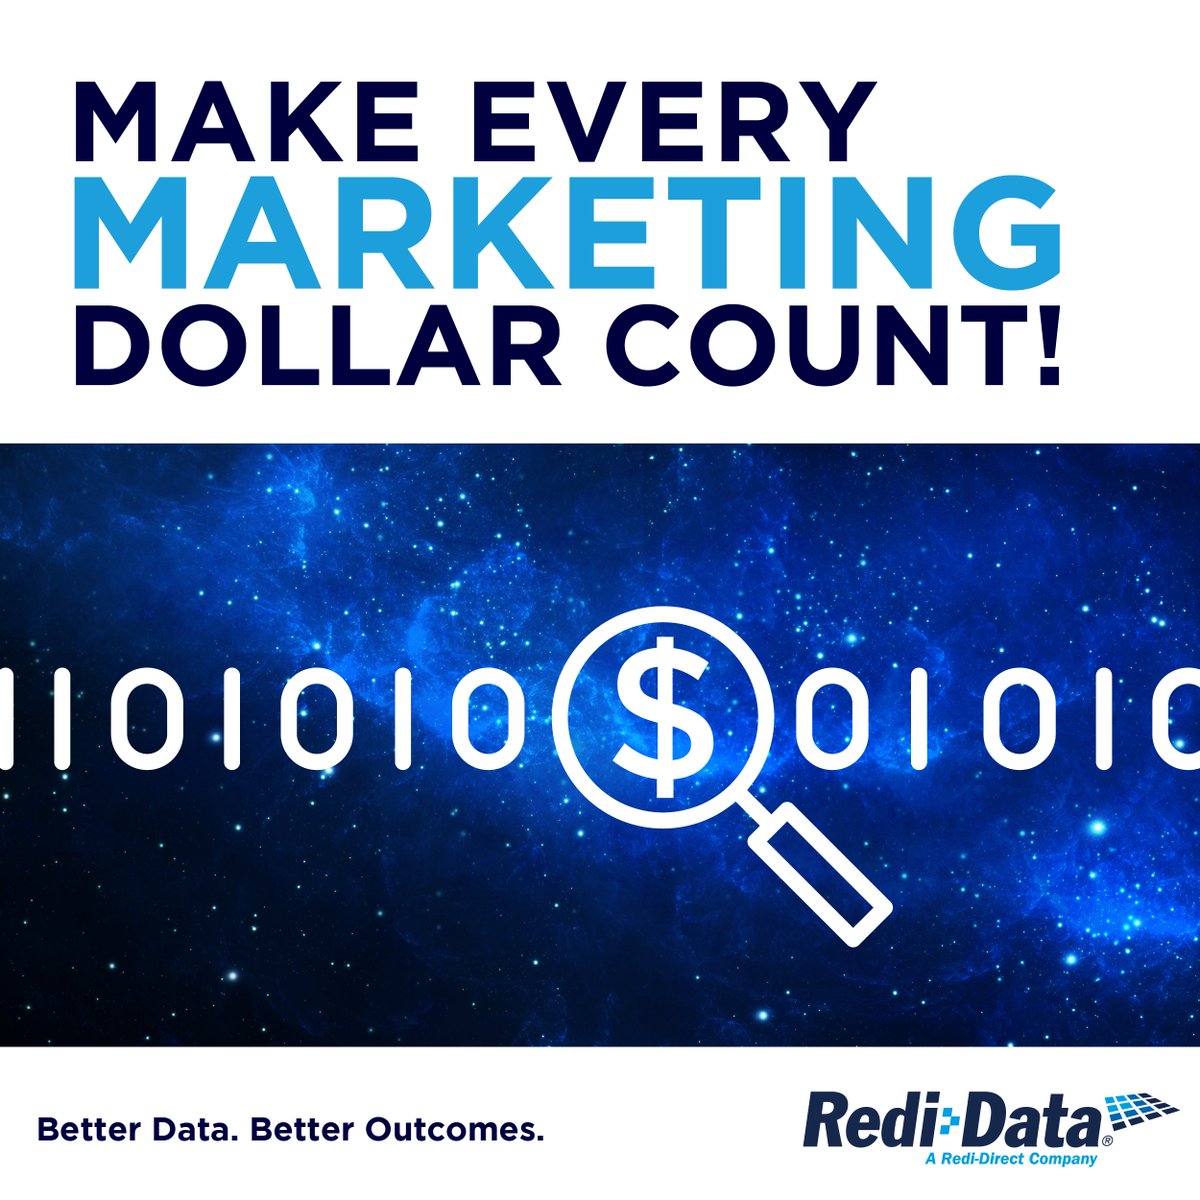 Make every marketing dollar count with Redi-Data's data processing services! Contact our data experts at sales@redidata.com. We can help maximize your direct mail deliverability and response rates while avoiding unnecessary costs ! #directmarketing

ow.ly/bxne50Ri3PO